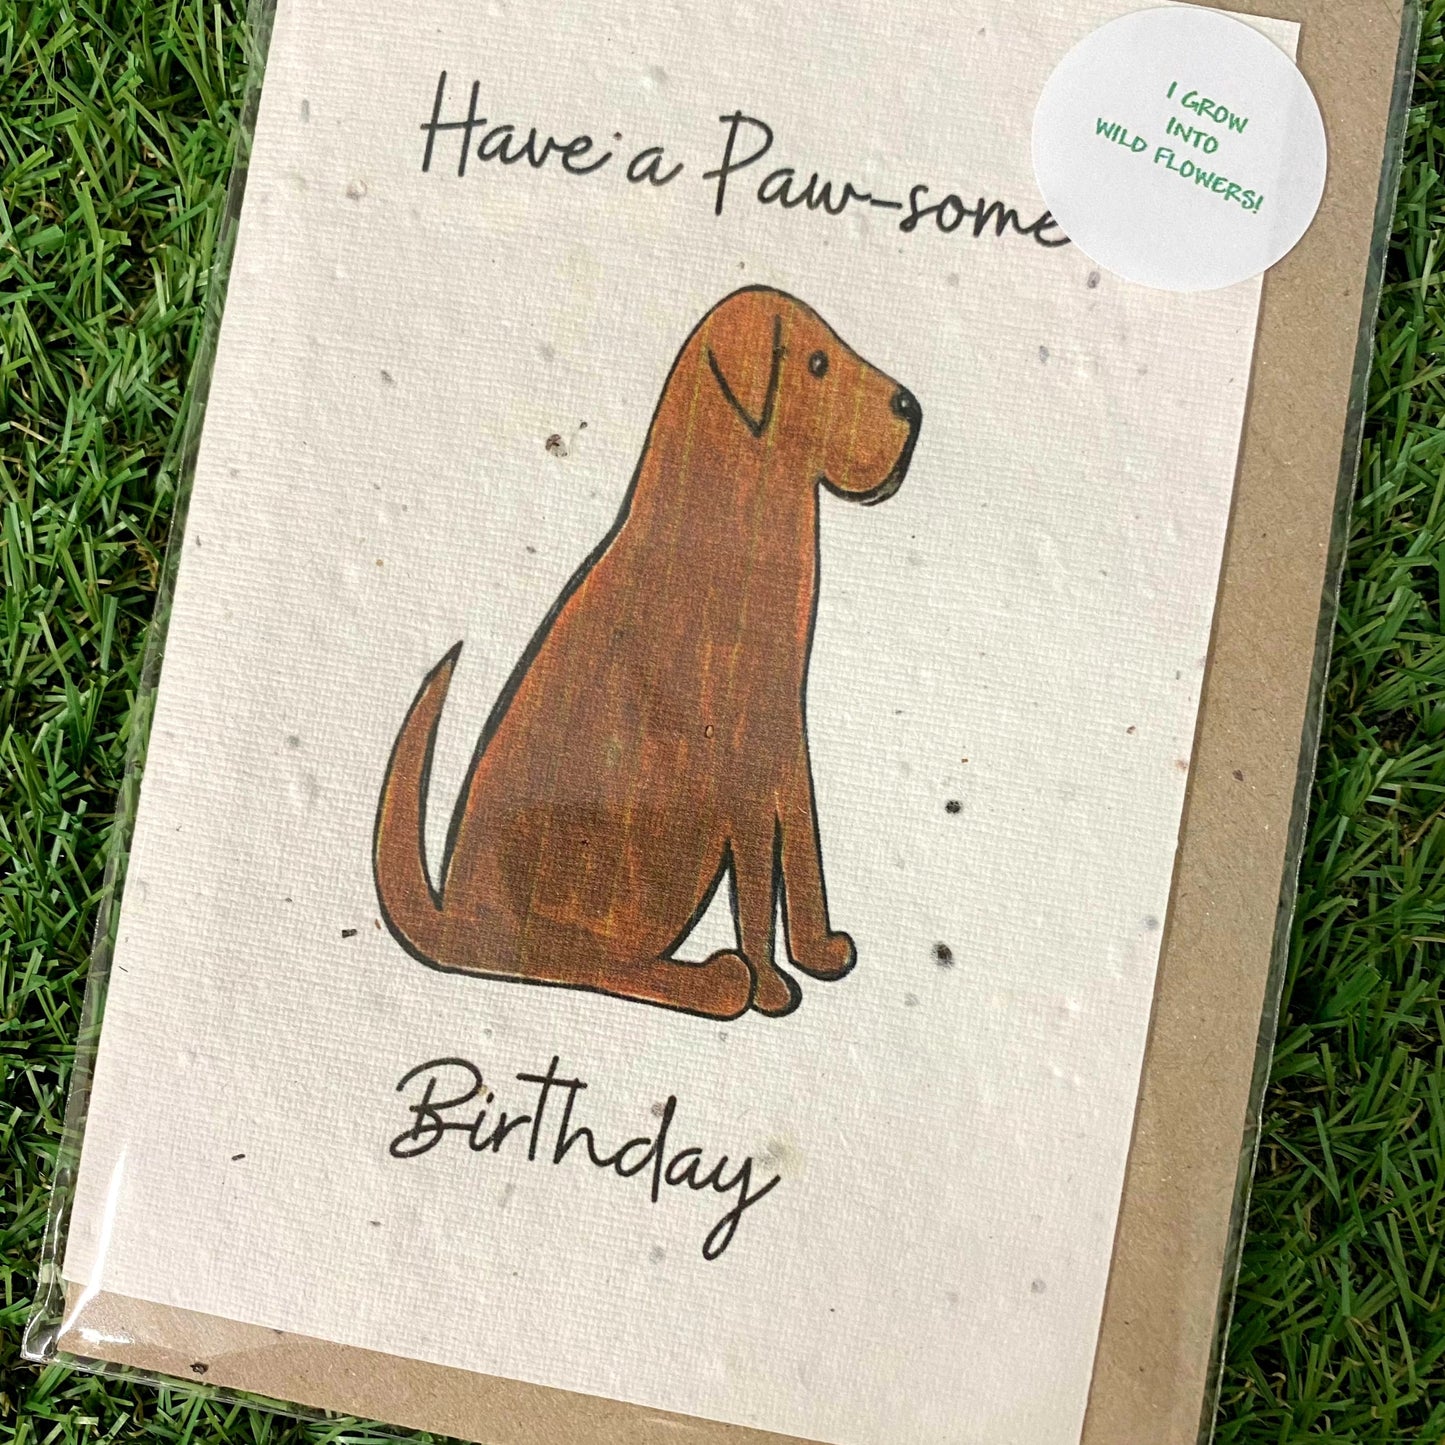 Seed Paper Greeting Card, Paw-some Birthday